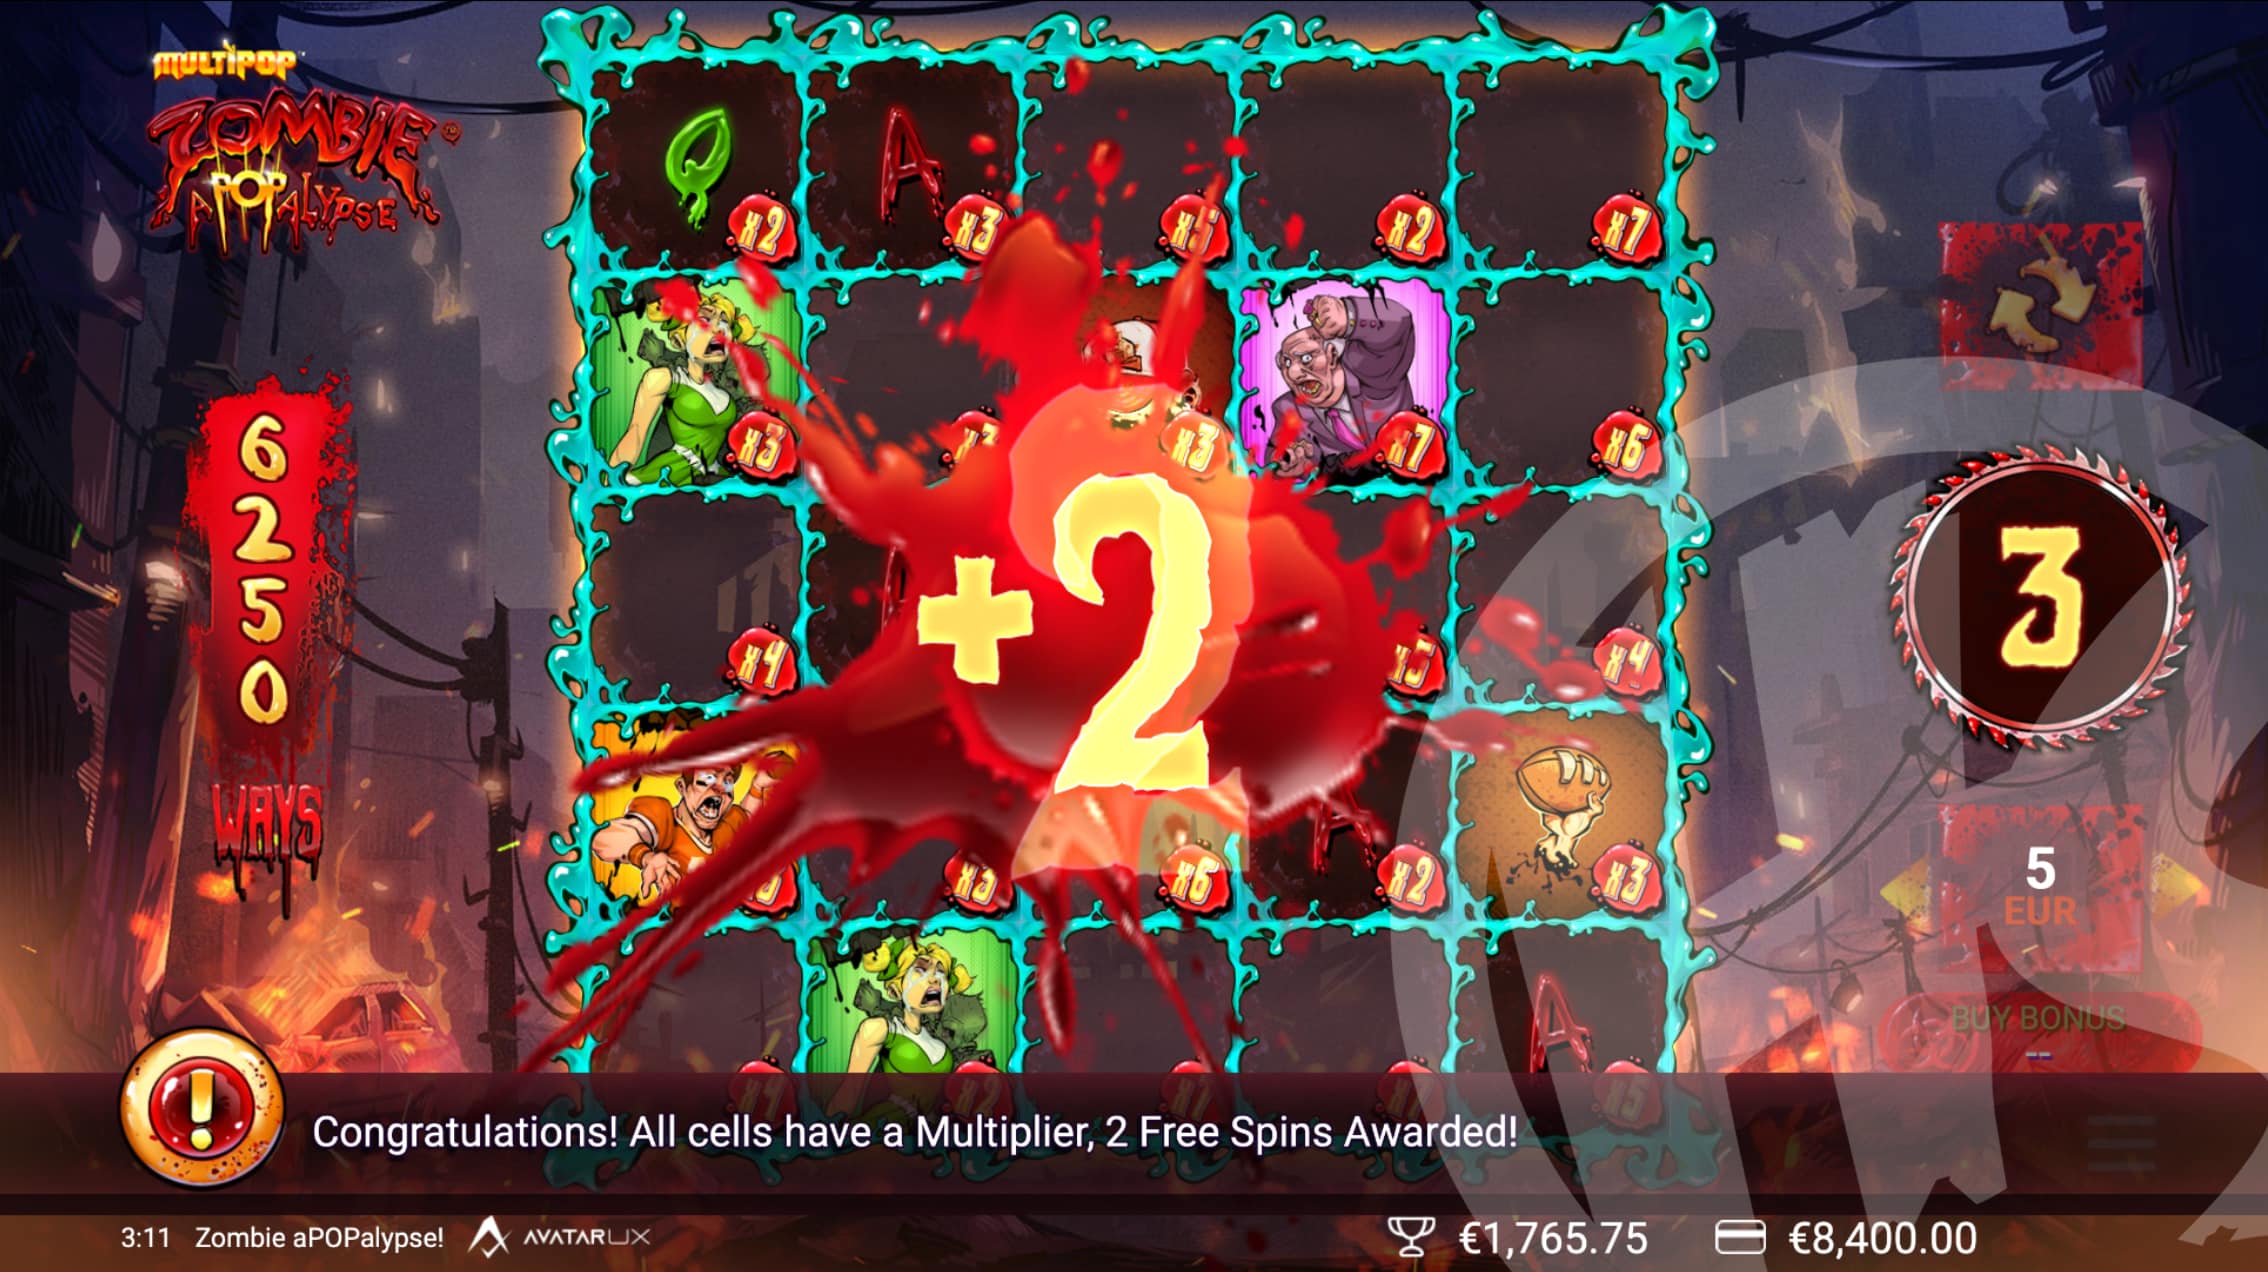 Fill the Grid With Cell Multipliers to Trigger an Additional +2 Free Spins